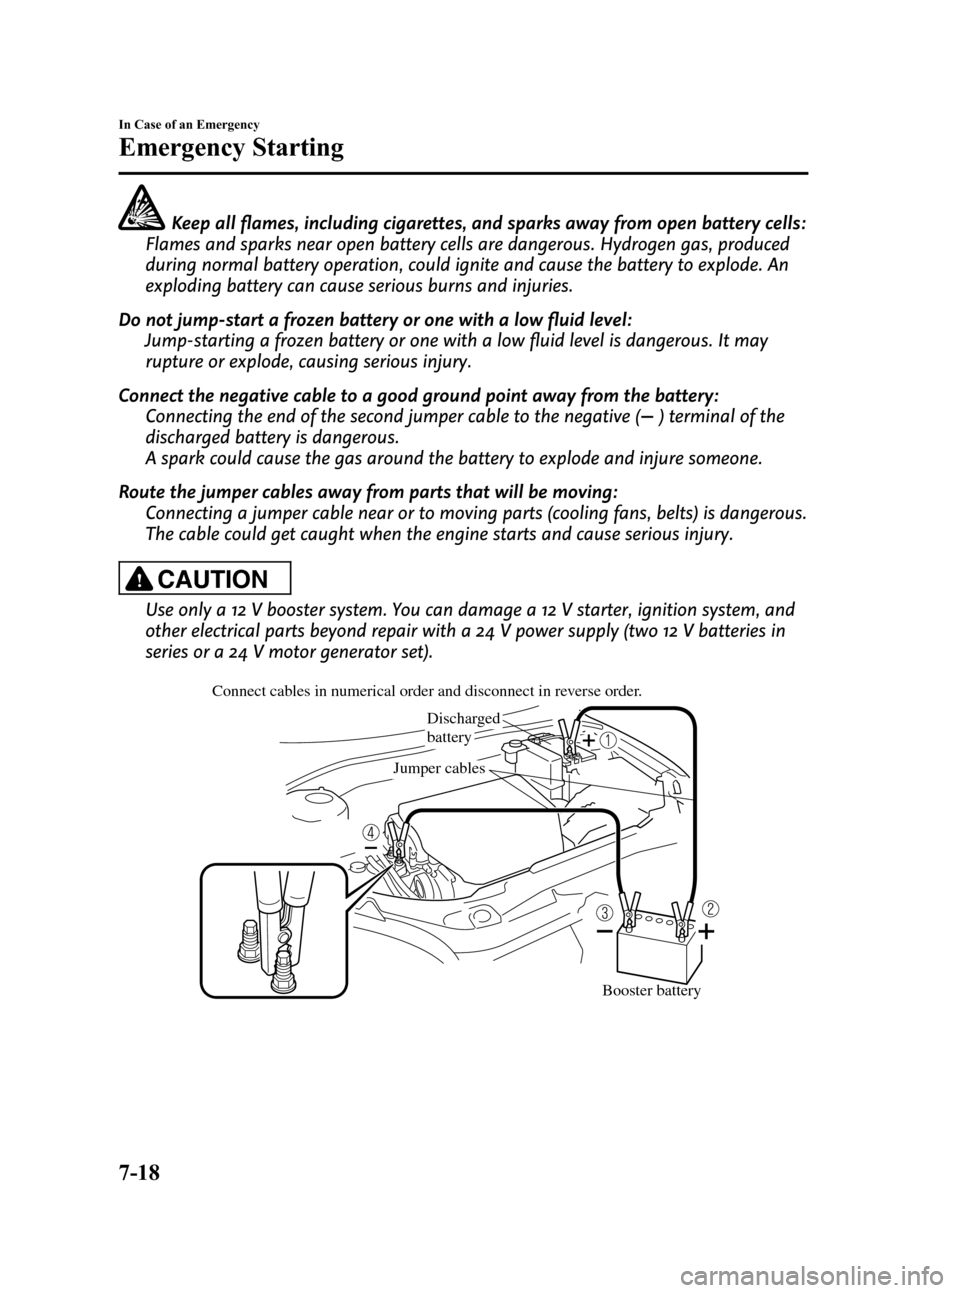 MAZDA MODEL 3 HATCHBACK 2008  Owners Manual (in English) Black plate (262,1)
Keep all flames, including cigarettes, and sparks away from open battery cells:
Flames and sparks near open battery cells are dangerous. Hydrogen gas, produced
during normal batter